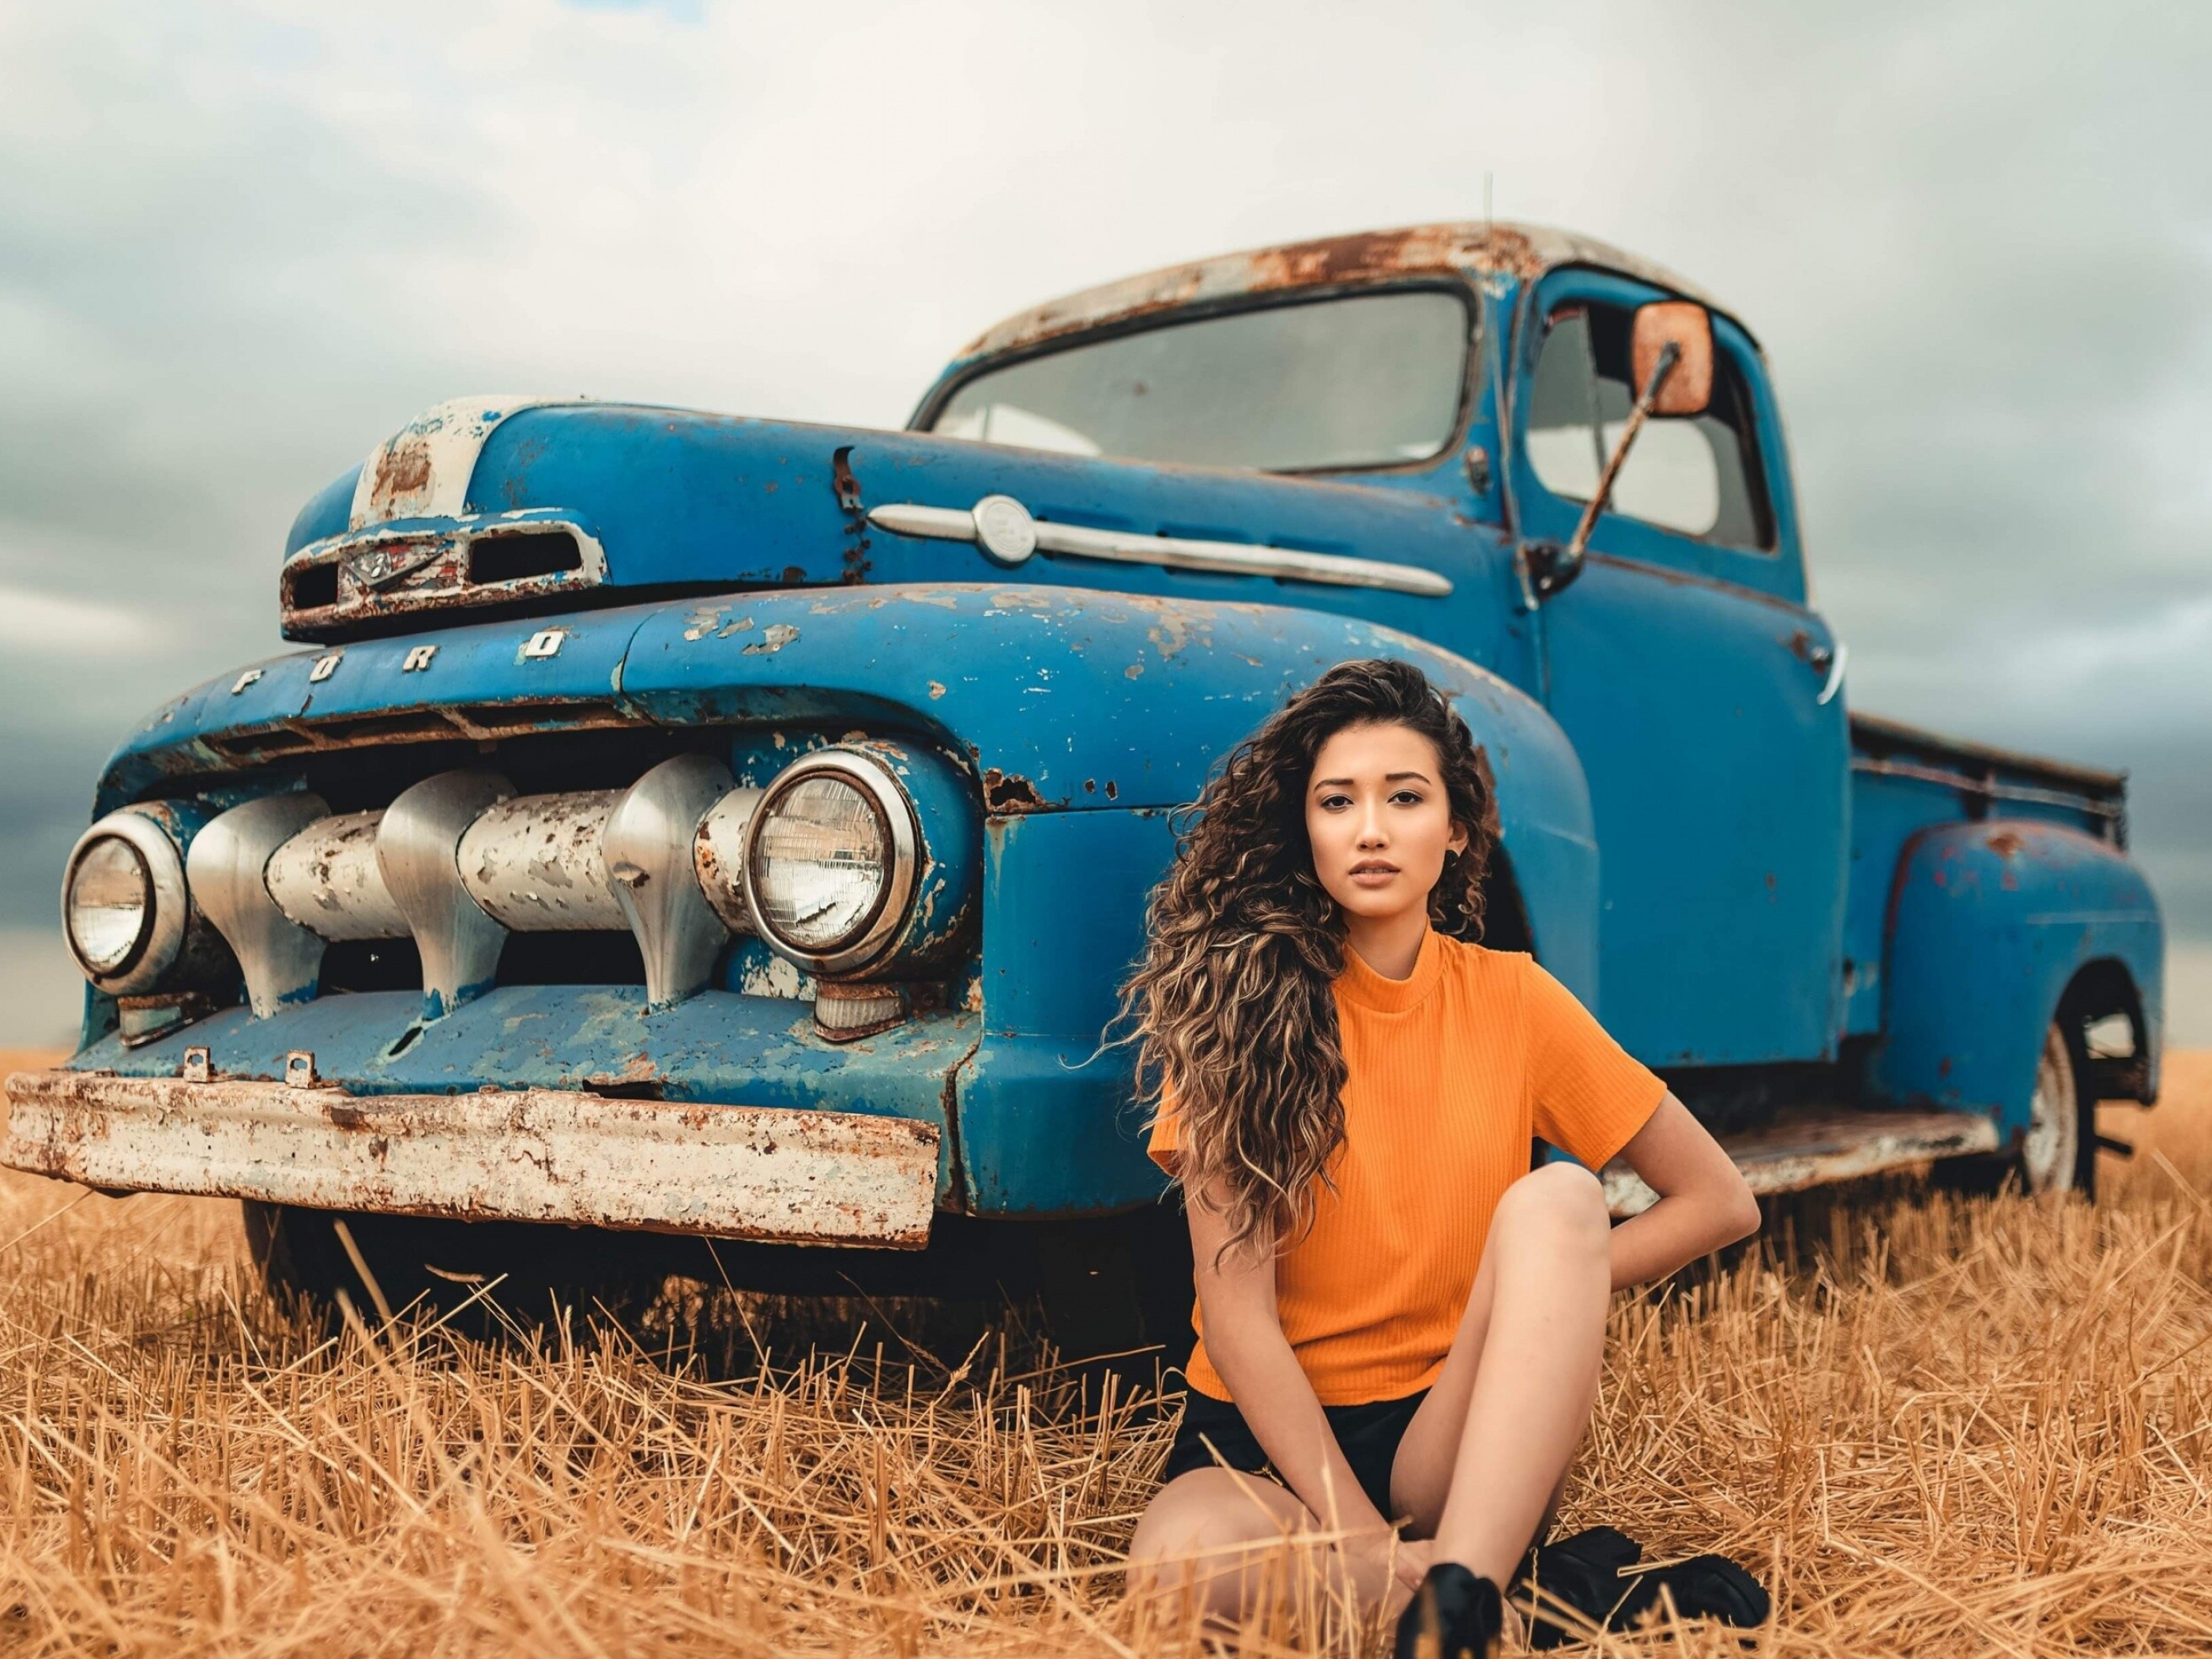 Girls and Trucks: Vintage Ford car, Rusty vehicle, Stubble field, The short stalks left standing after corn has been cut. 2800x2100 HD Background.